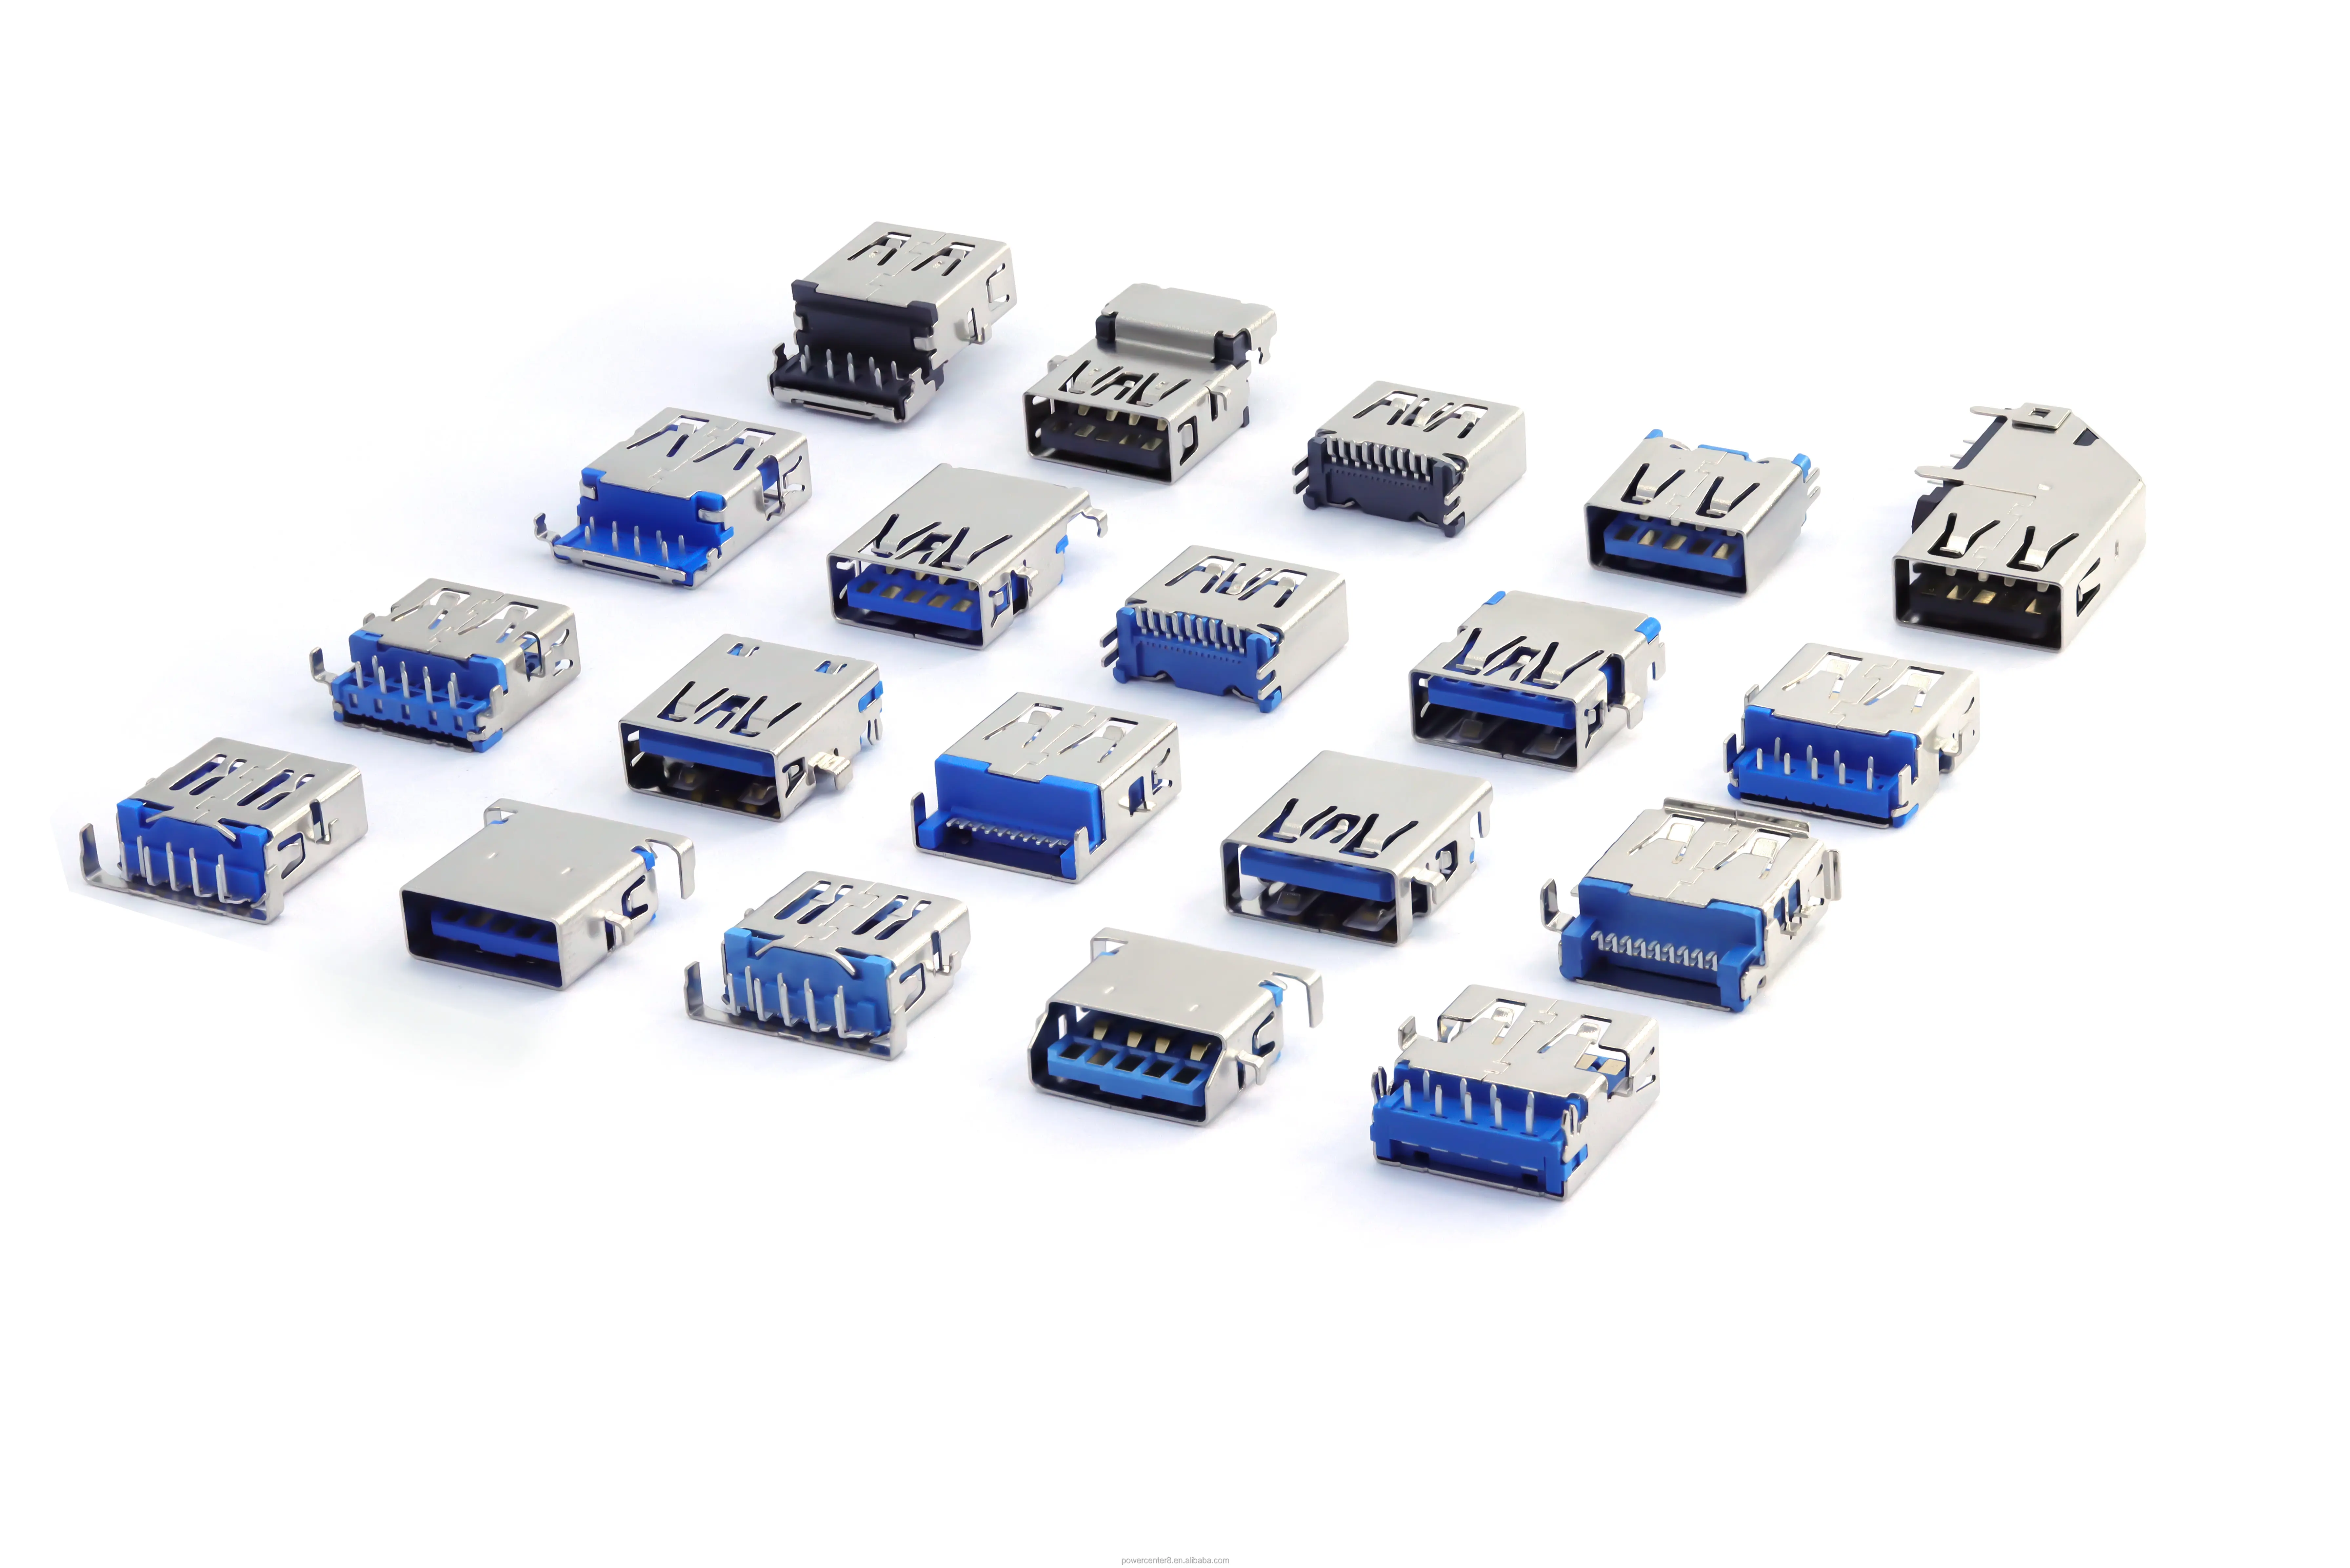 factory sales height on pcb 1.86mm 24Pin DIP USB 3.1 type a connector female for automotive new energy car can used in car